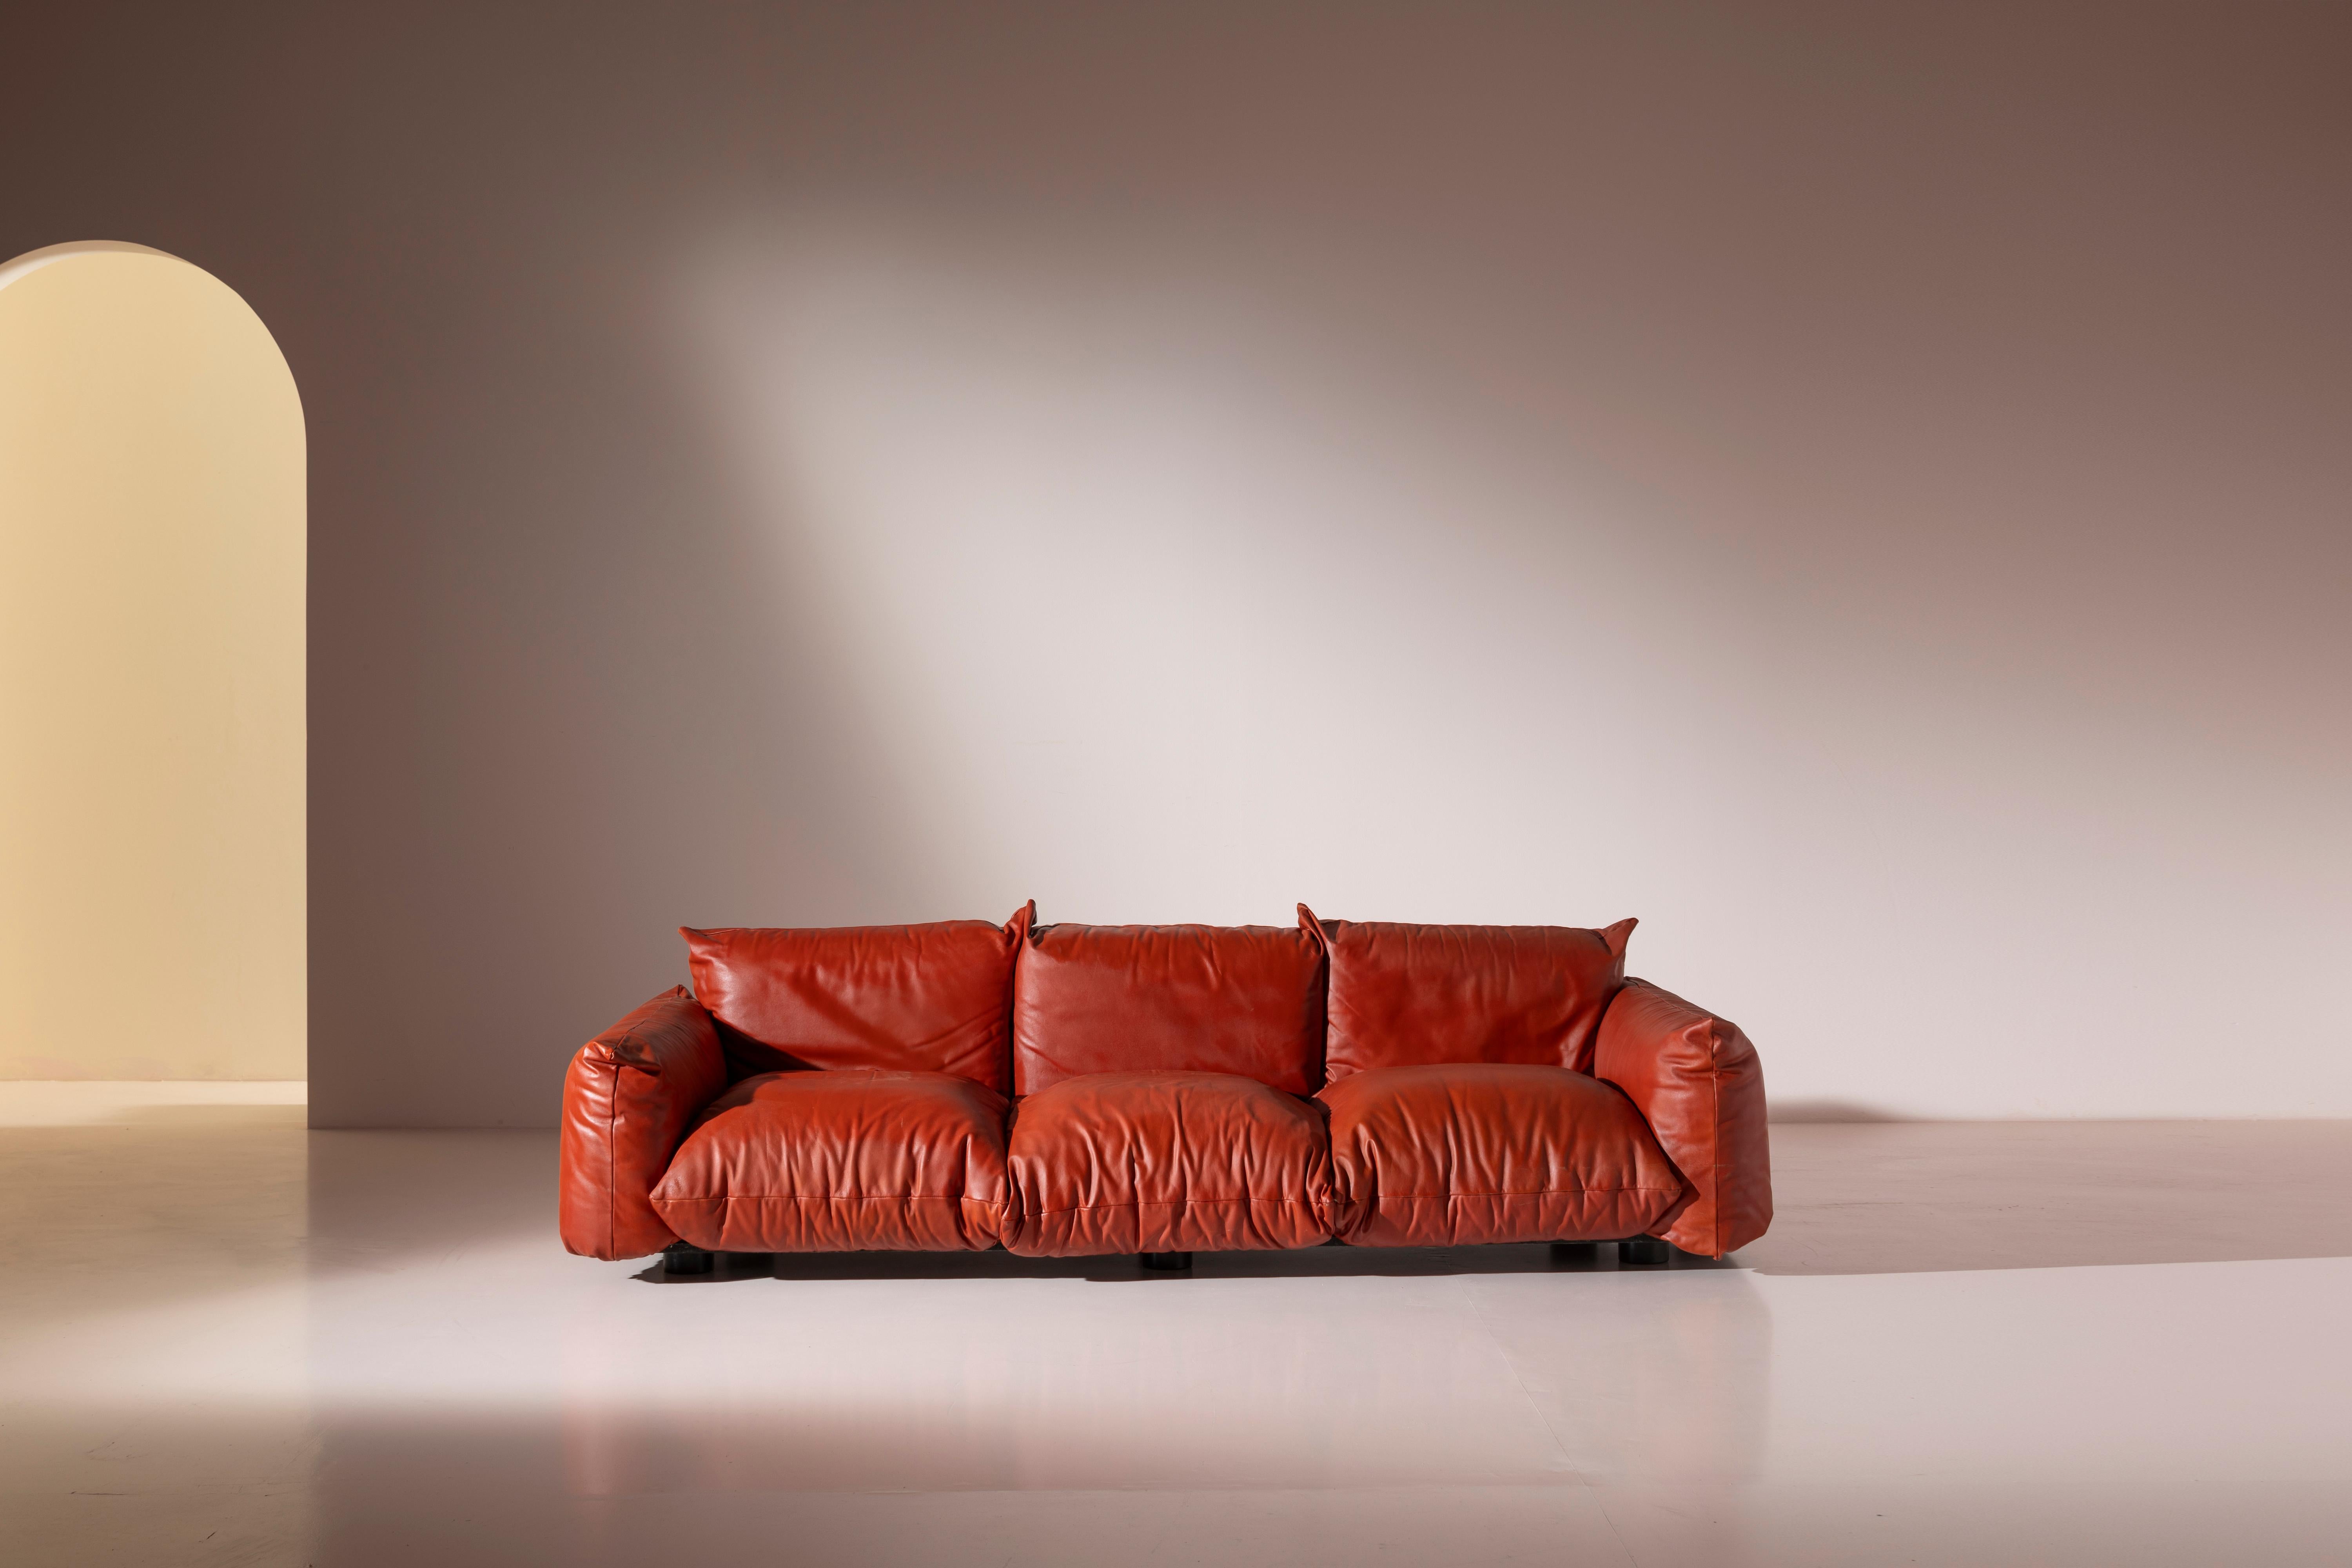 A first edition three-seater Marenco leather sofa by Arflex from the 1970s, designed by the talented Mario Marenco.

Introduced in 1970, this sofa showcases a modular architecture, comprising distinct seat, back, and arm cushions. Its linear,